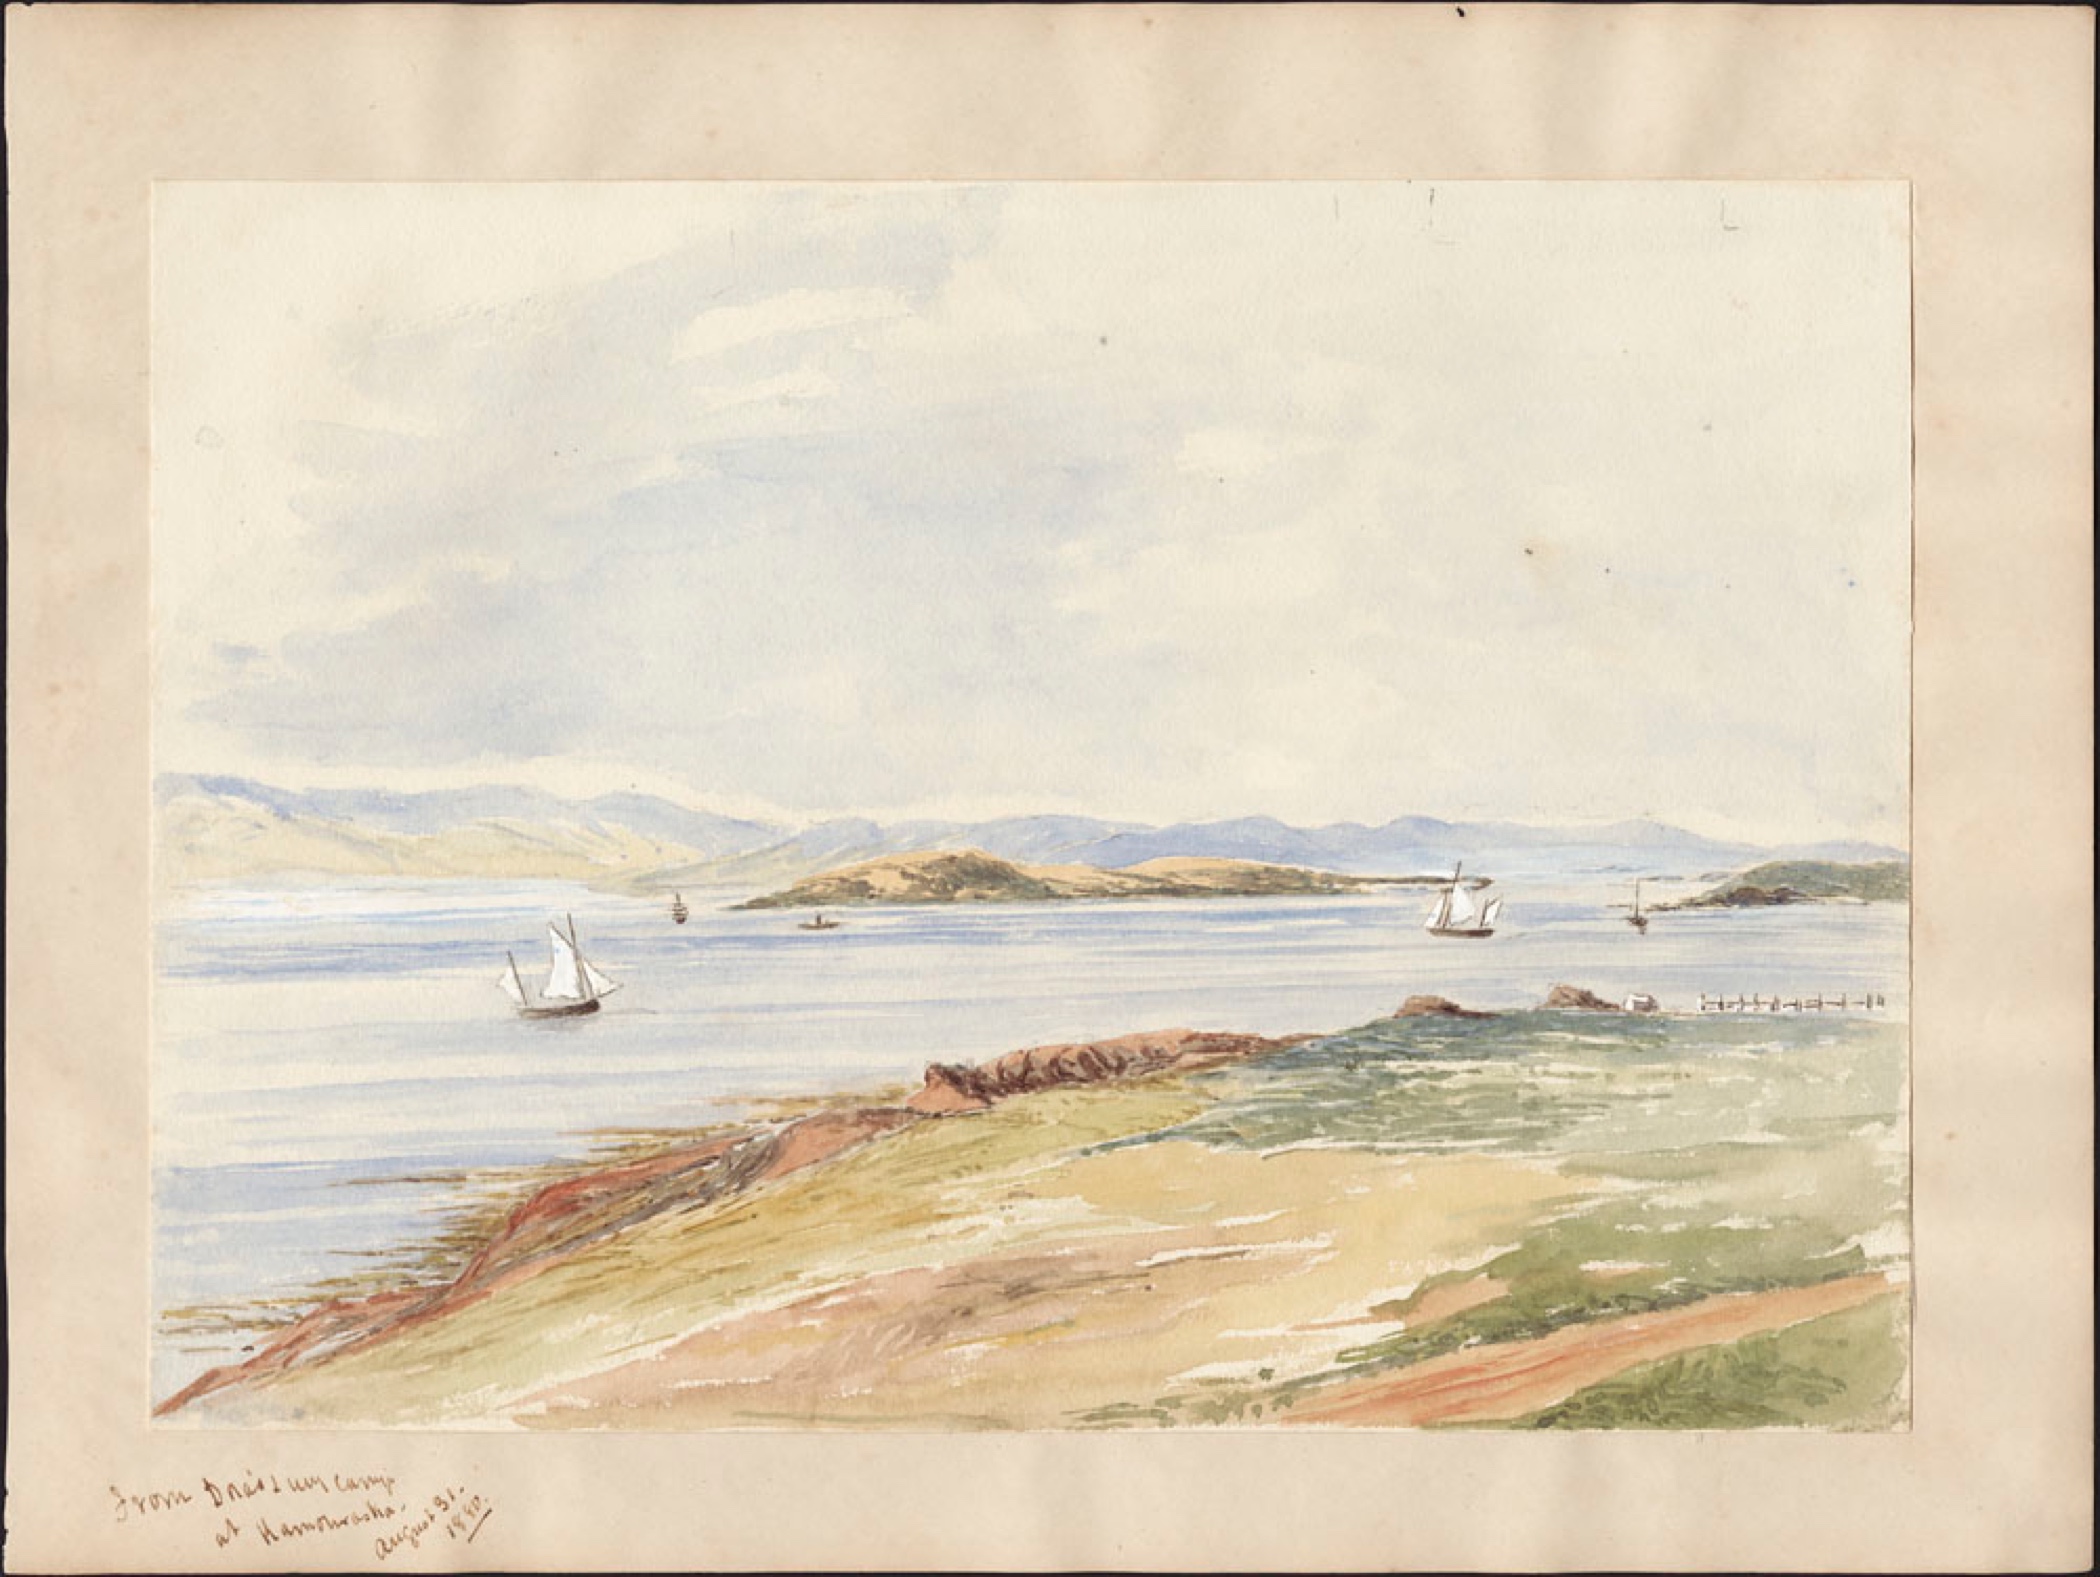 A pale watercolour of a river view, with a dirt road in the foreground, some sailboats on the water, an island and the far shore in the distance, under a colourless sky.